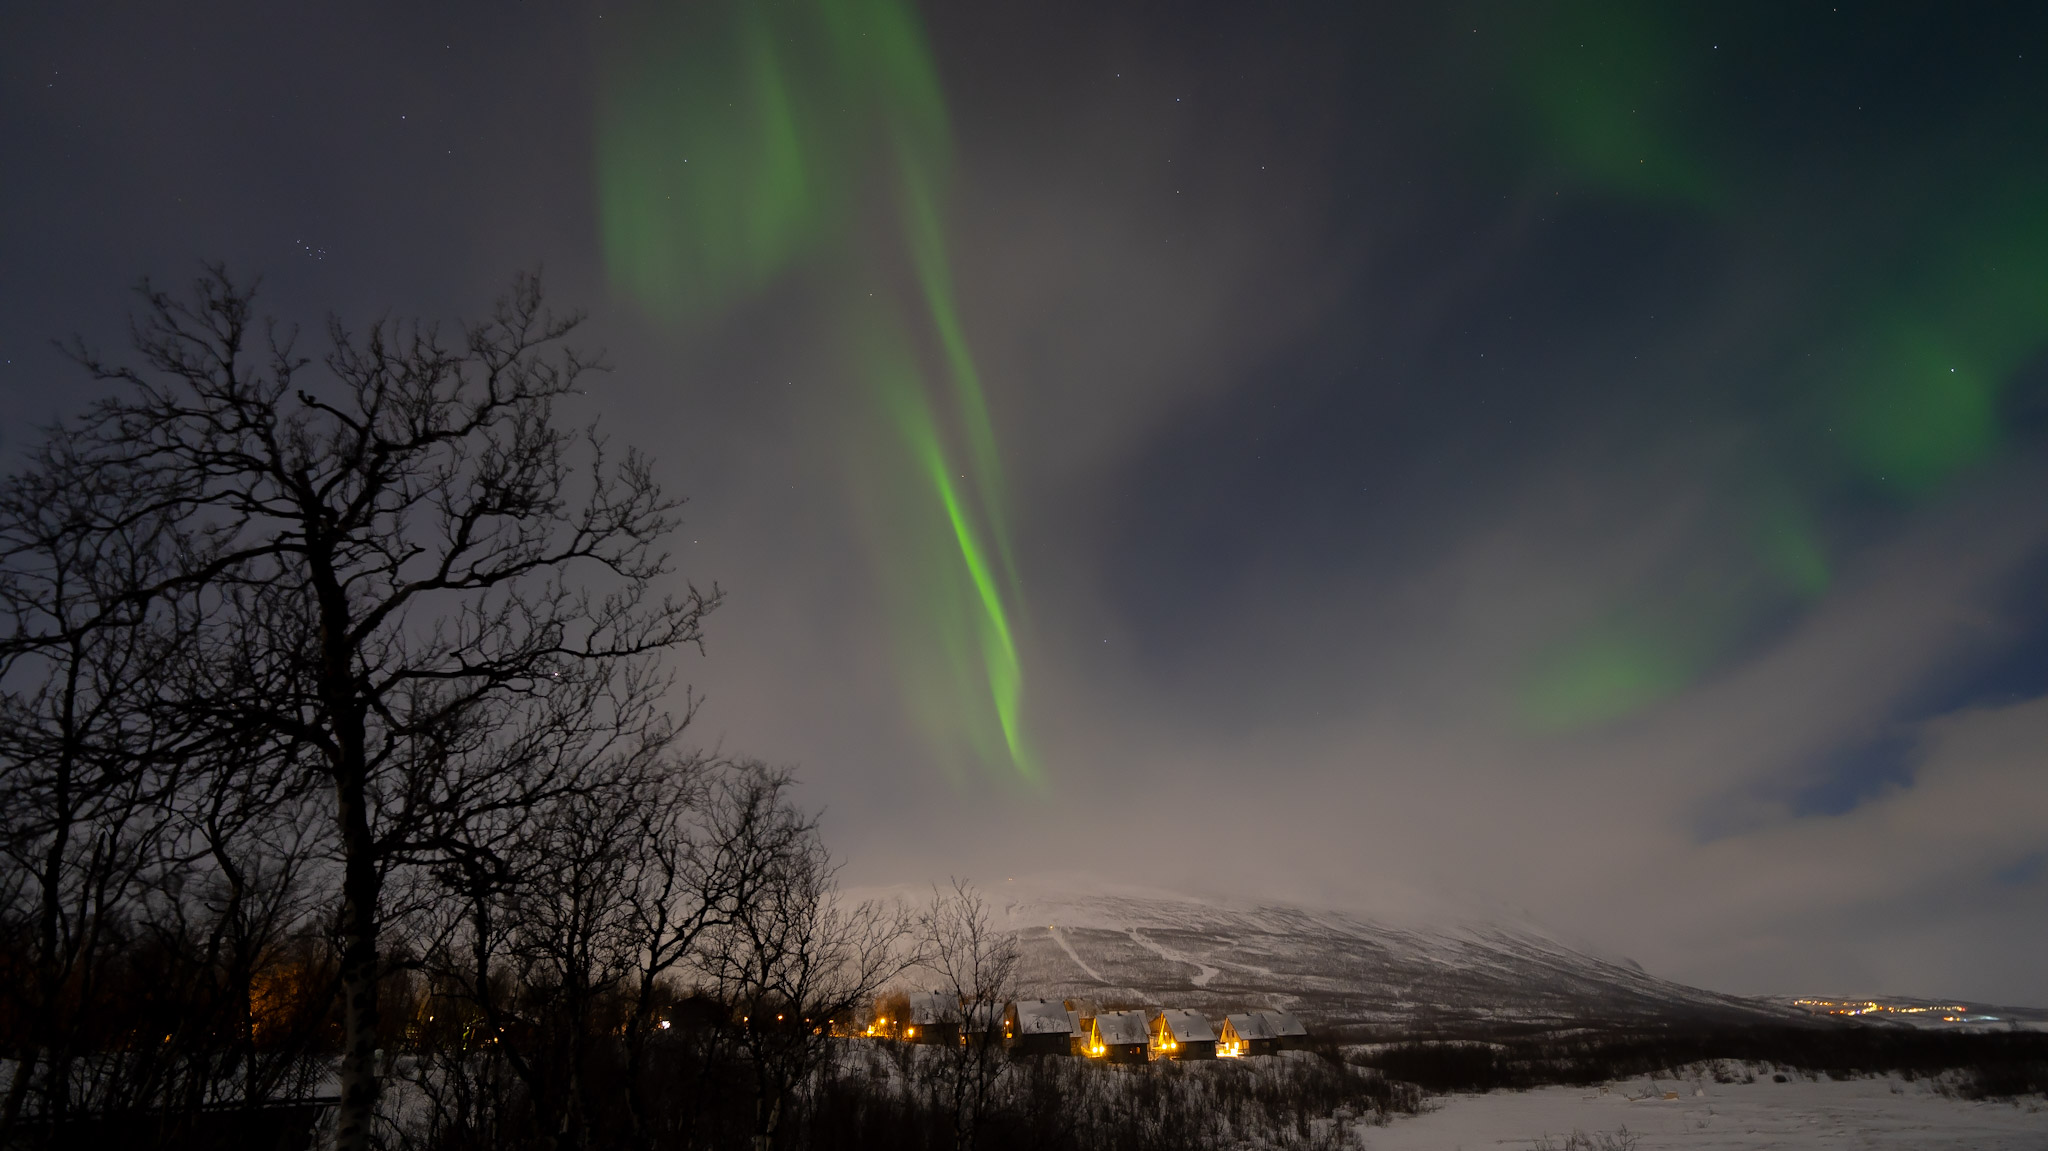 I put Abisko’s ‘cloud-busting weapon’ to the test during a Sweden northern lights adventure and was not disappointed Space